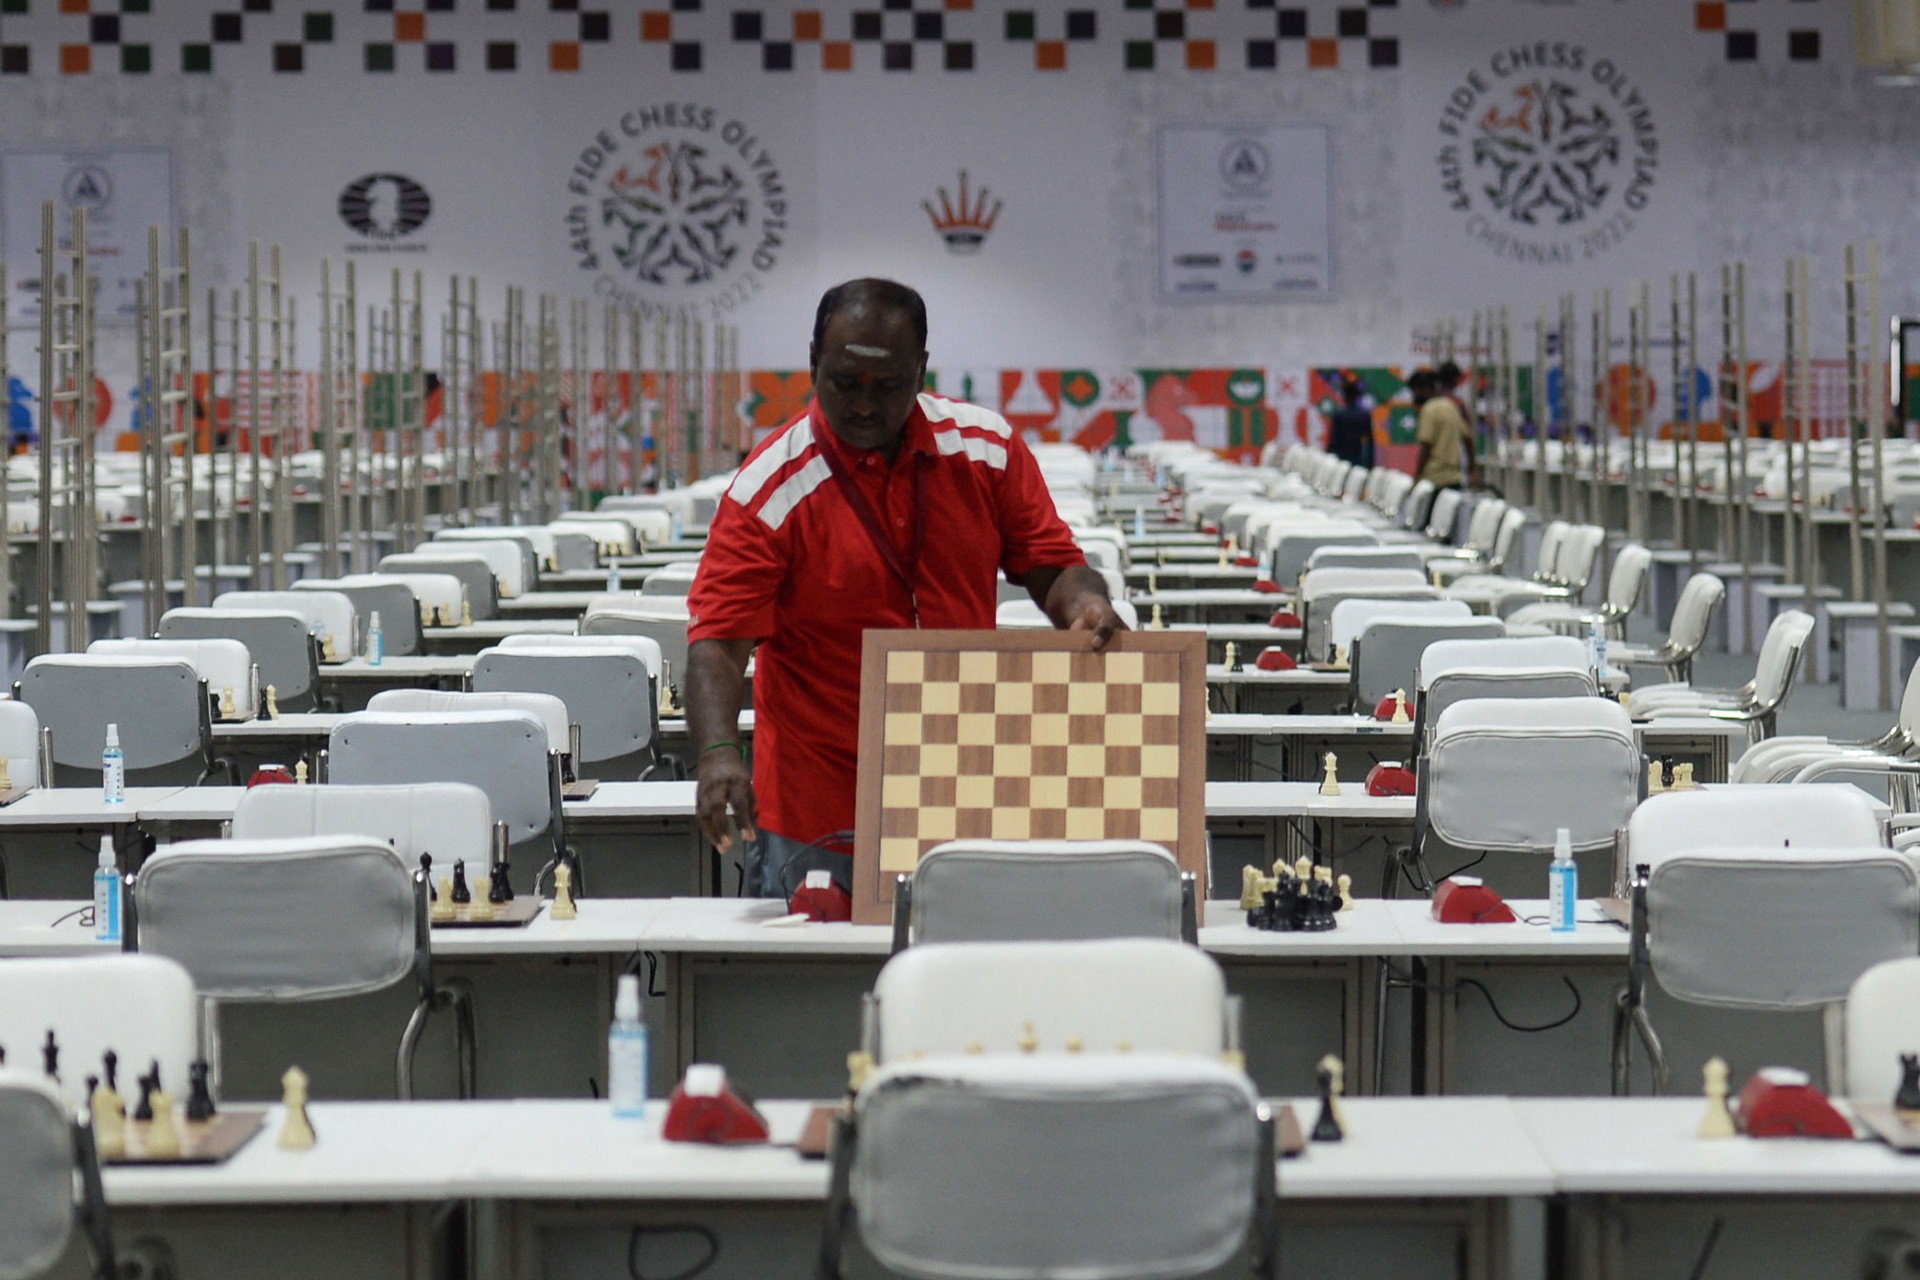 Chess Ban Holds Russia in Check - New Lines Magazine